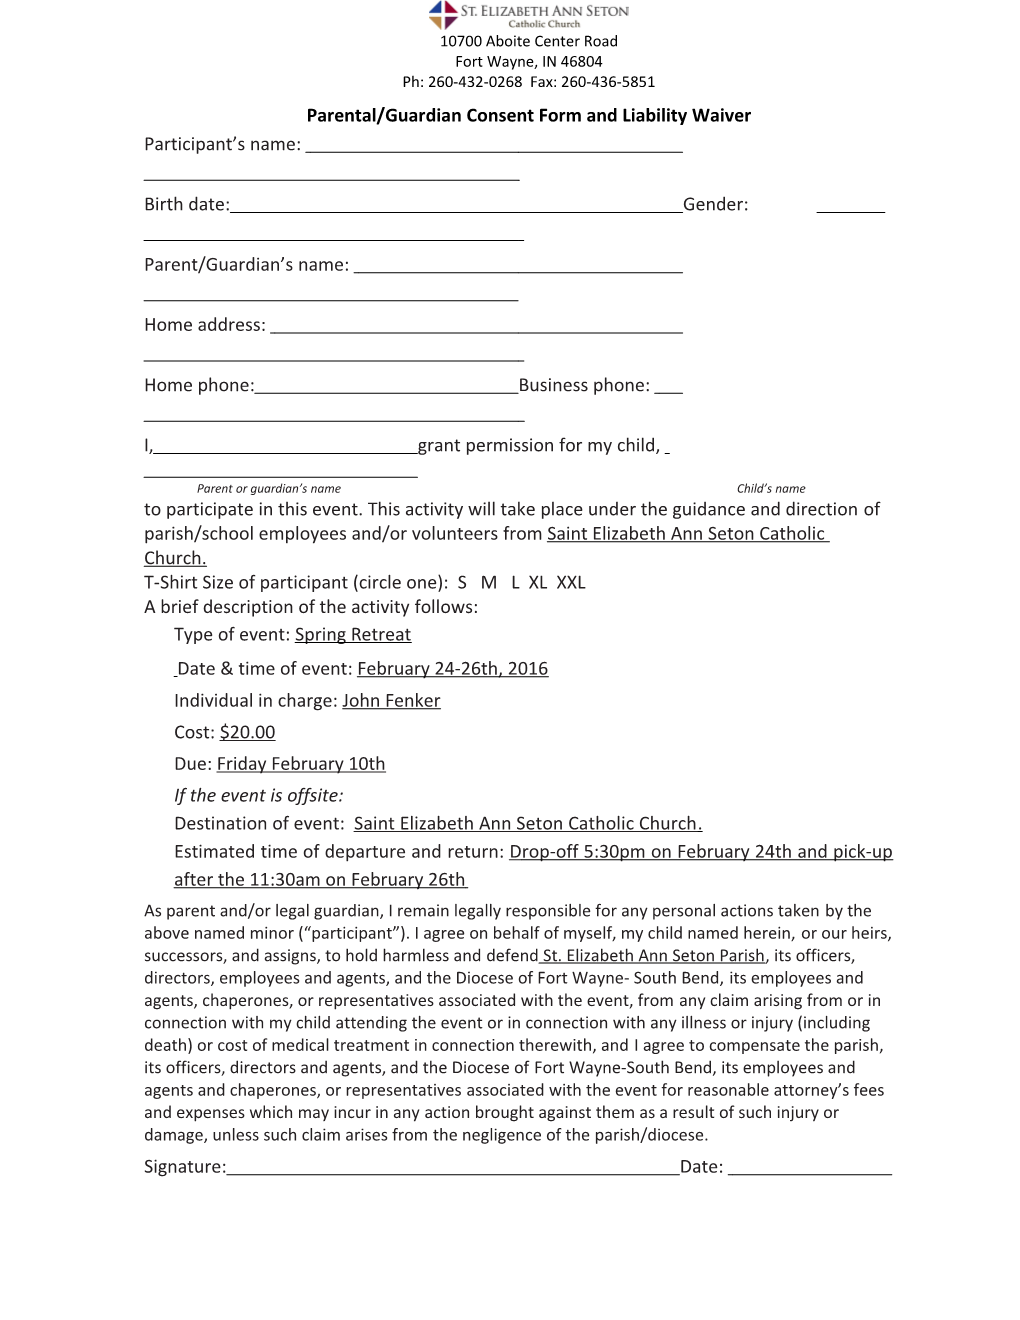 Parental/Guardian Consent Form and Liability Waiver s1